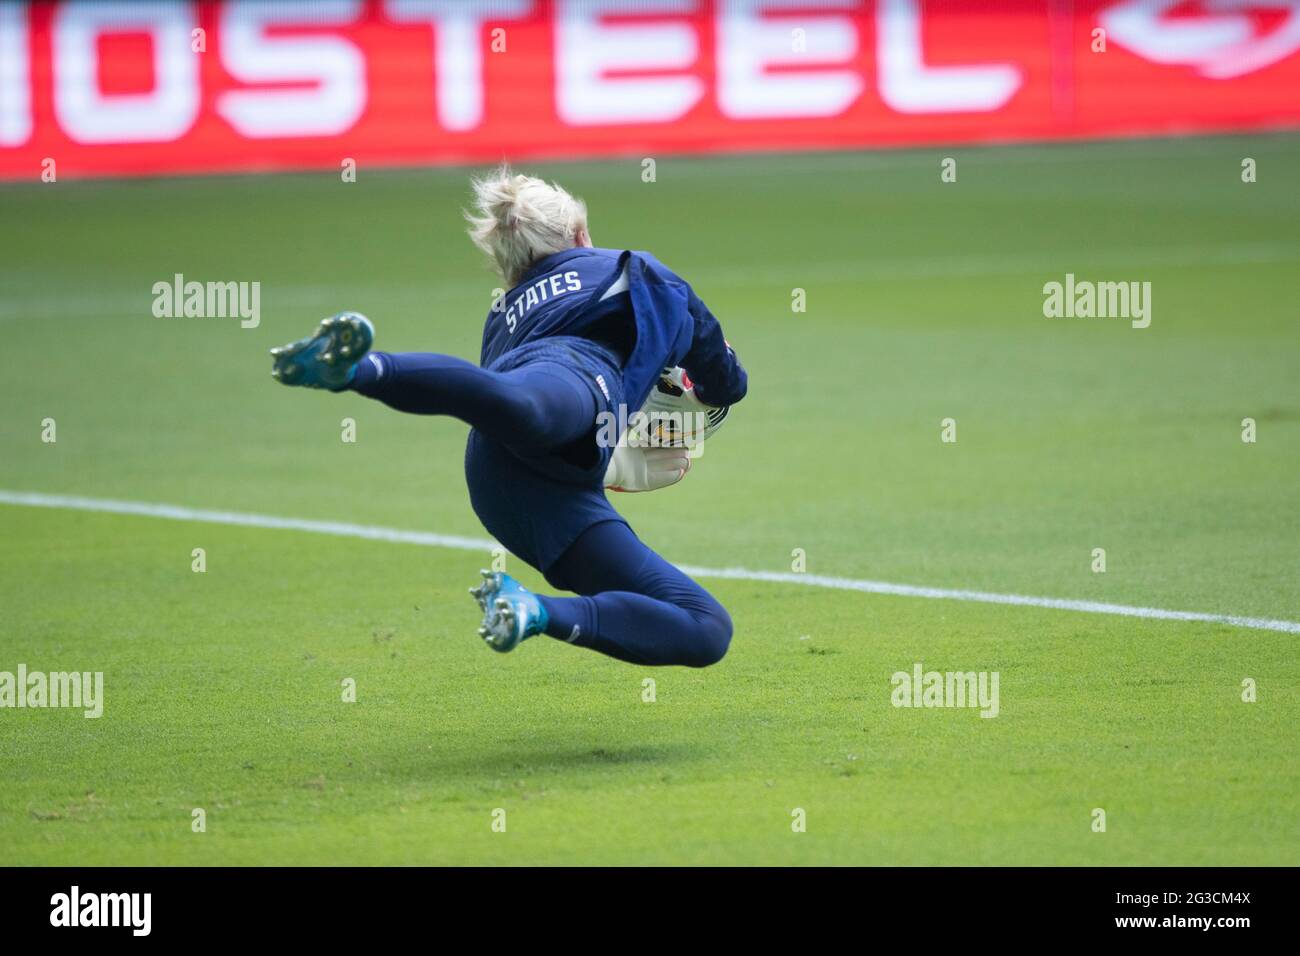 Austin, Texas, USA. 15th June, 2021. Members of the United States Women's National Team (USWNT) including goalkeeper JANE CAMPBELL warm up at the new Q2 soccer stadium in Austin during one of the final games on their road to the 2021 okyo Olympics. The team will play a friendly with Nigeria on Wednesday evening. Credit: Bob Daemmrich/ZUMA Wire/Alamy Live News Stock Photo